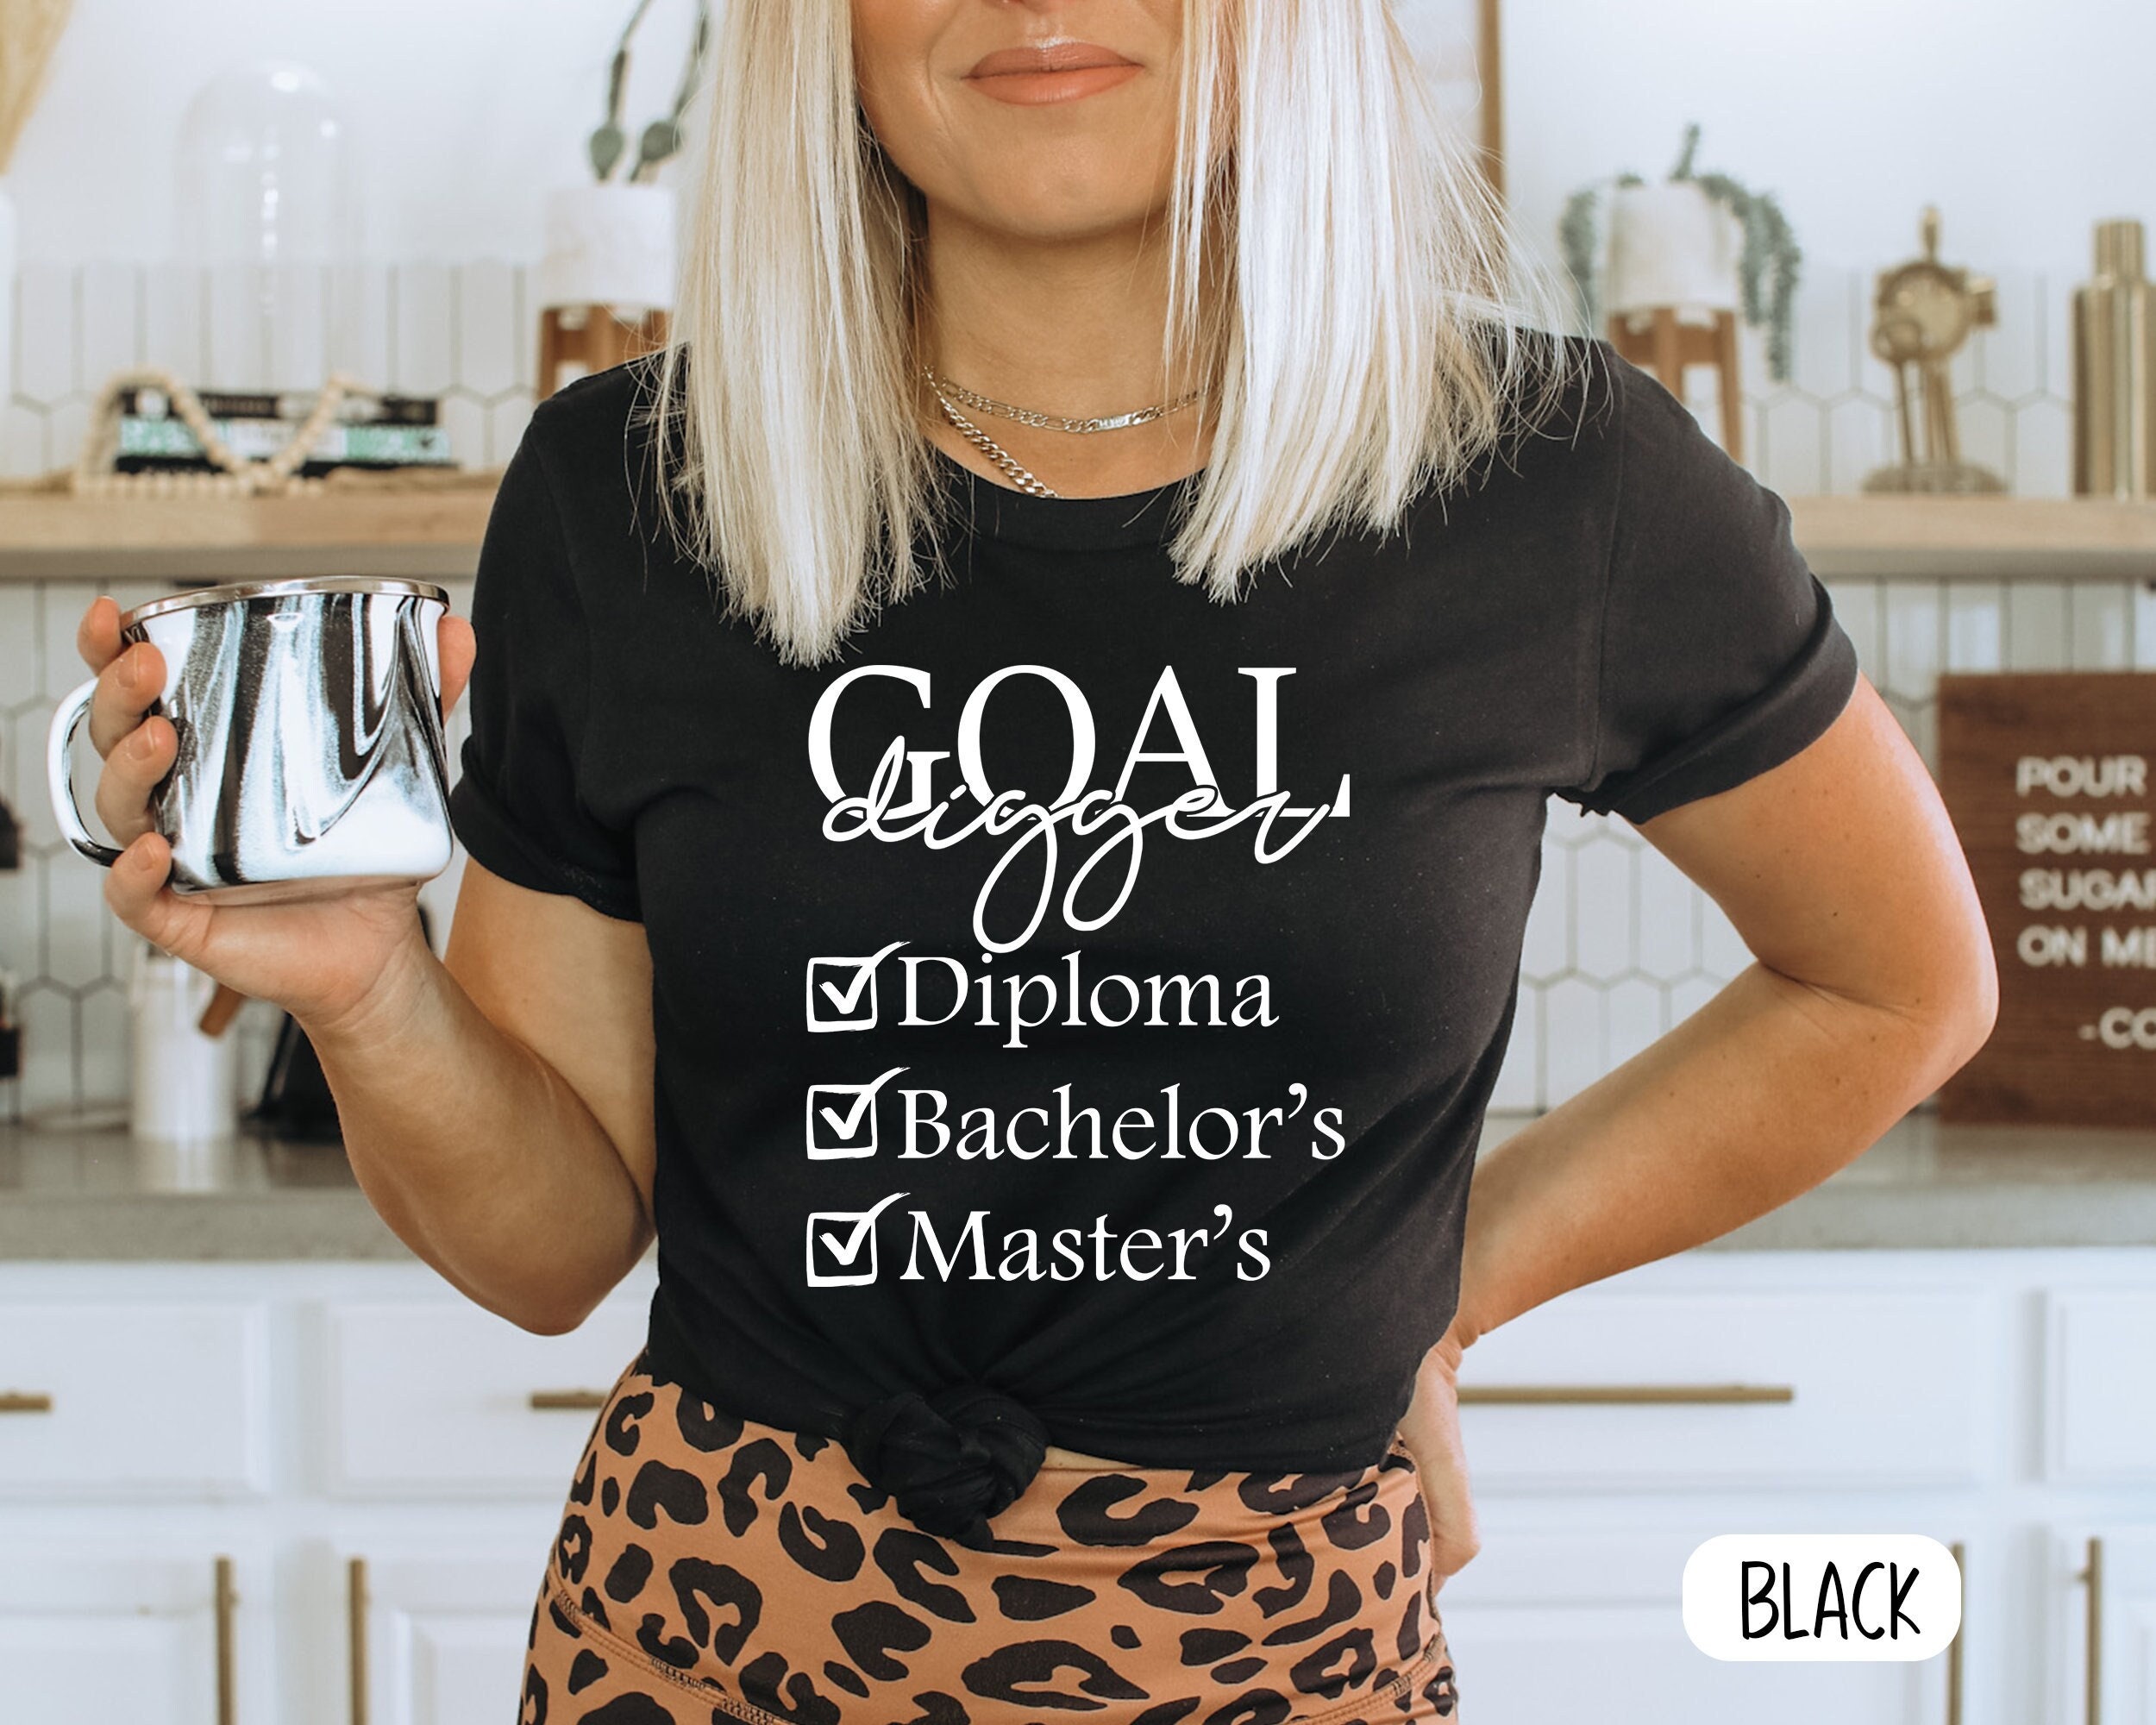 Be A Goal Digger (Double Sided Print)- Oversized T-Shirts by ANTHERR